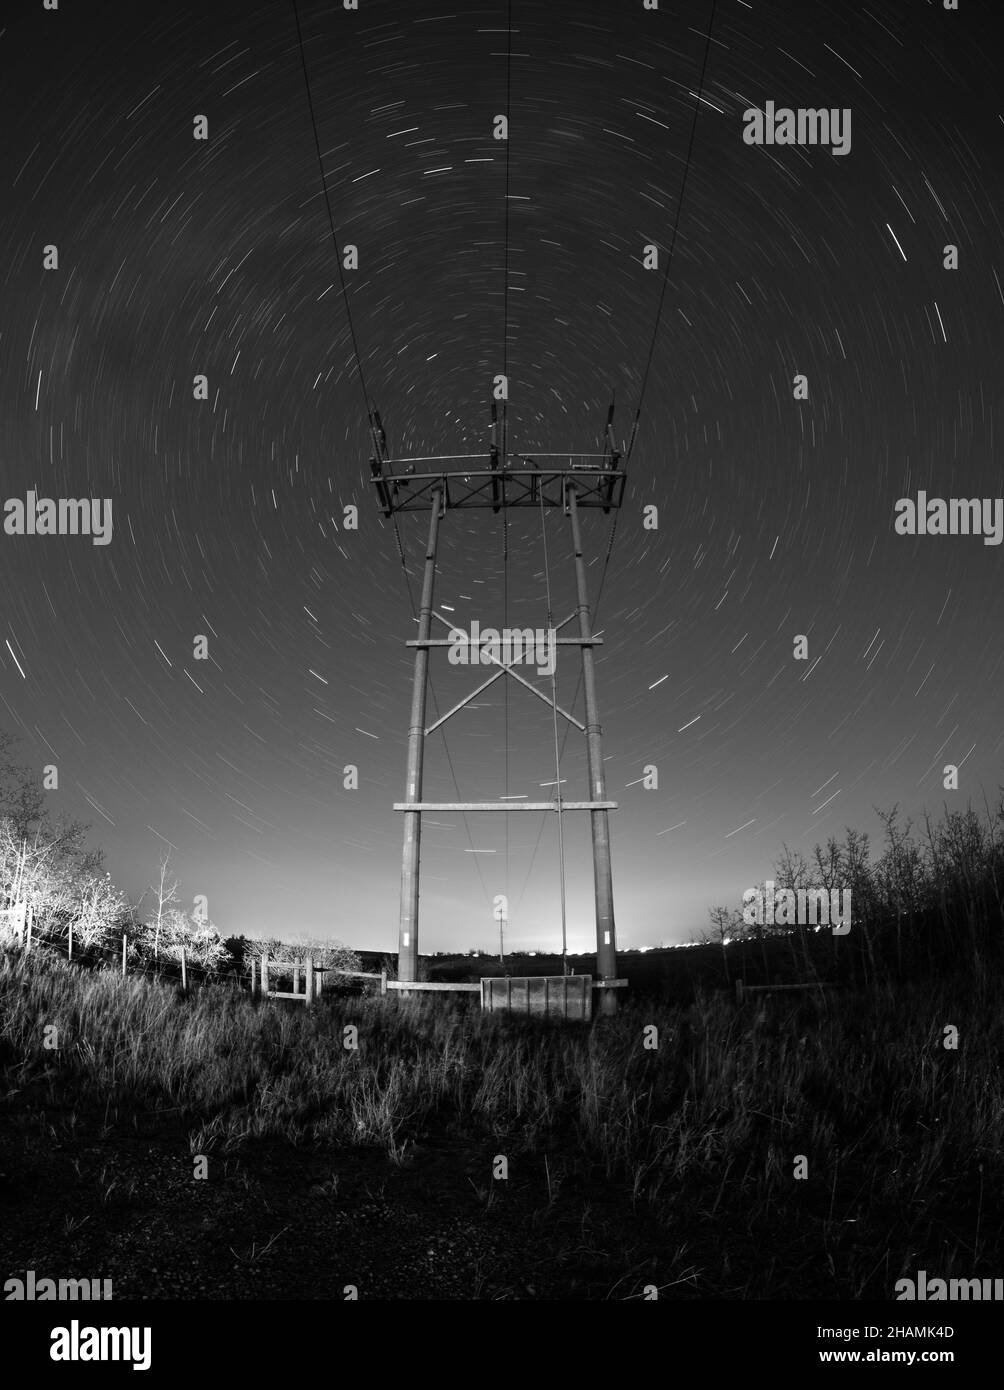 AIRDRIE, CANADA - Nov 17, 2021: A vertical grayscale shot of an electricity tower under a night sky with star trails Stock Photo